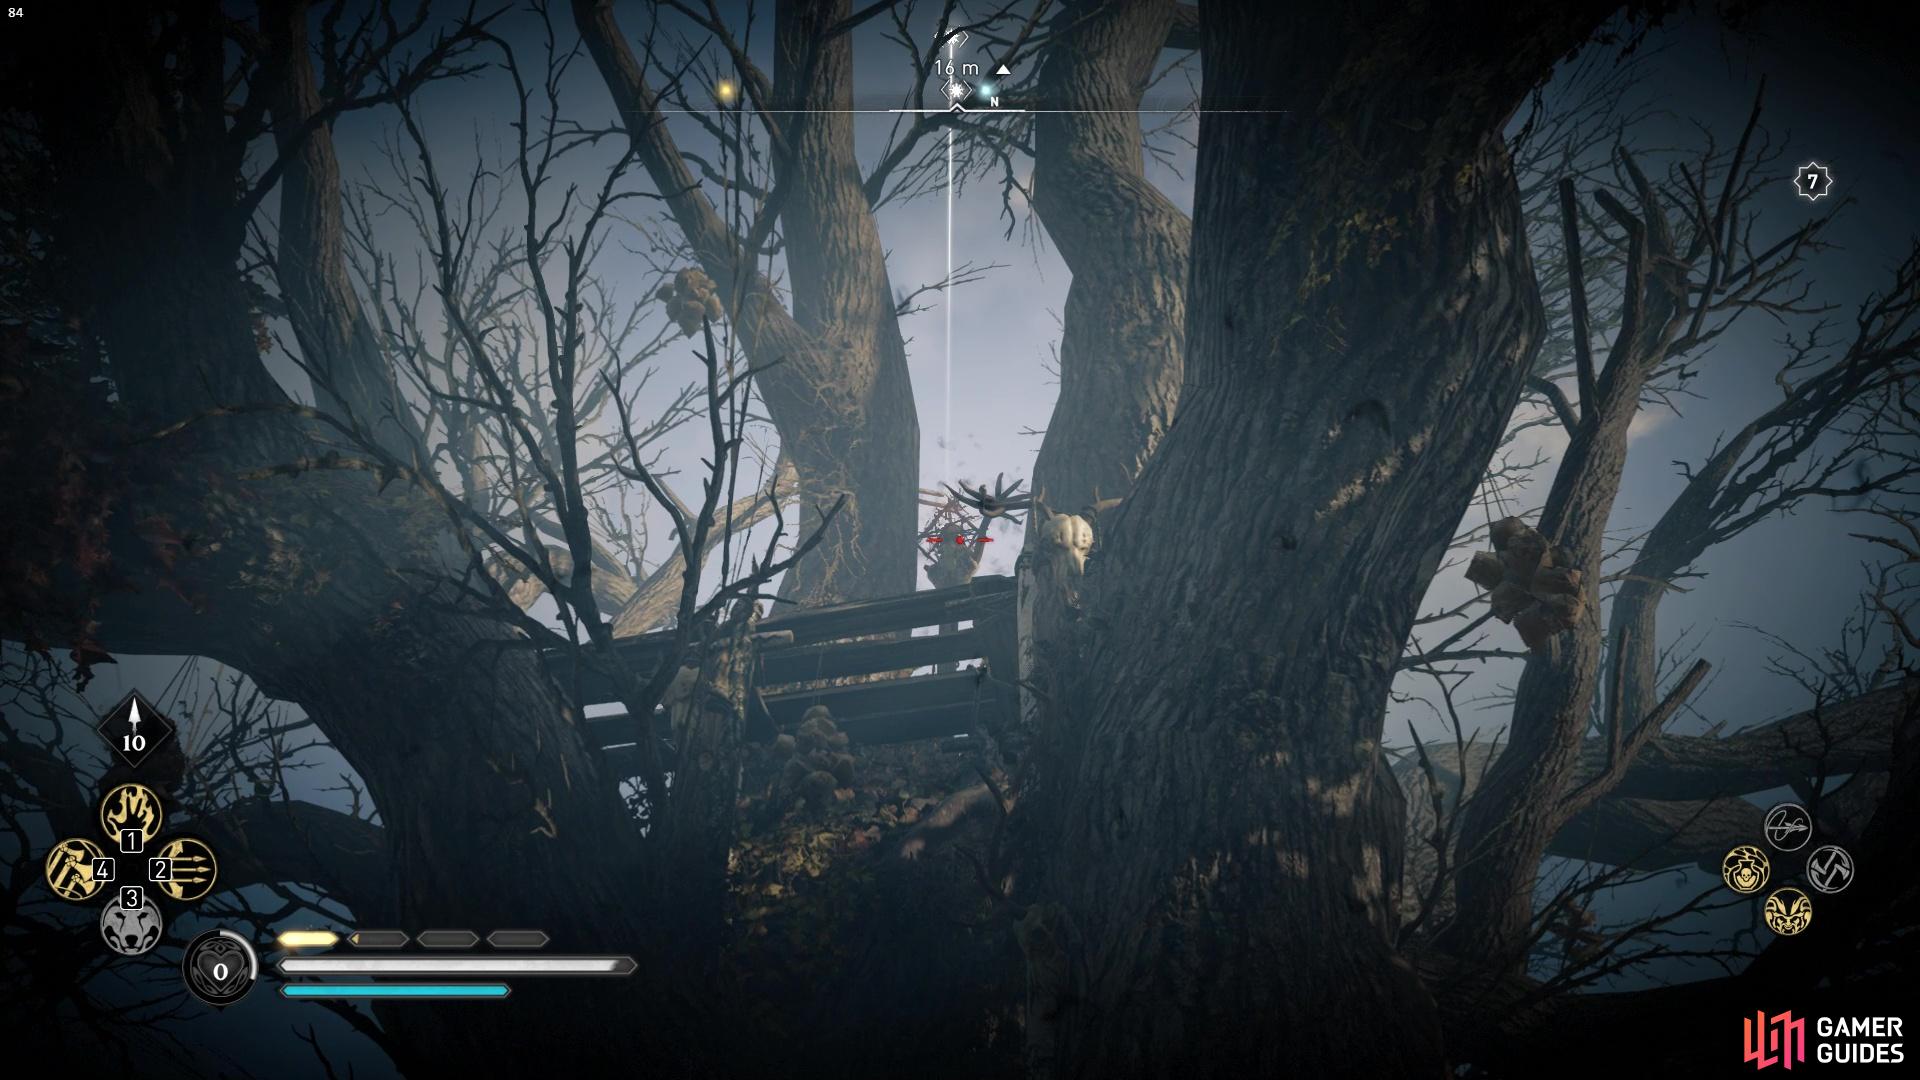 youll need to shoot up at the cursed symbol in the tree.